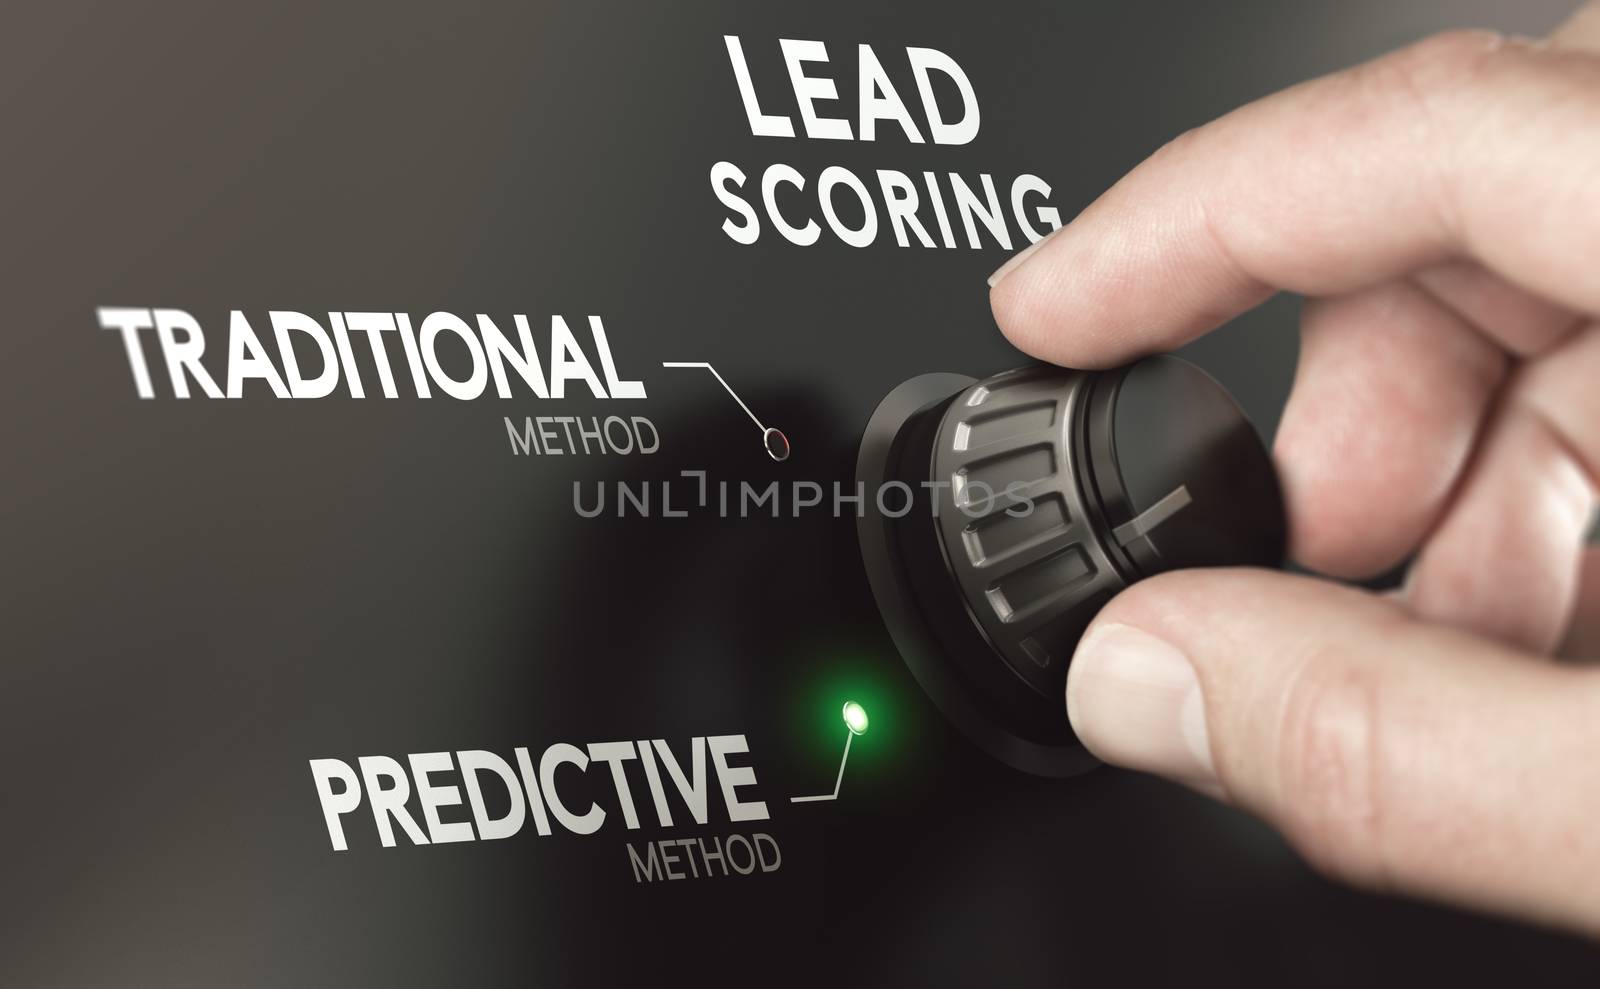 Choosing Predictive Lead Scoring Instead of Traditional  Methodo by Olivier-Le-Moal